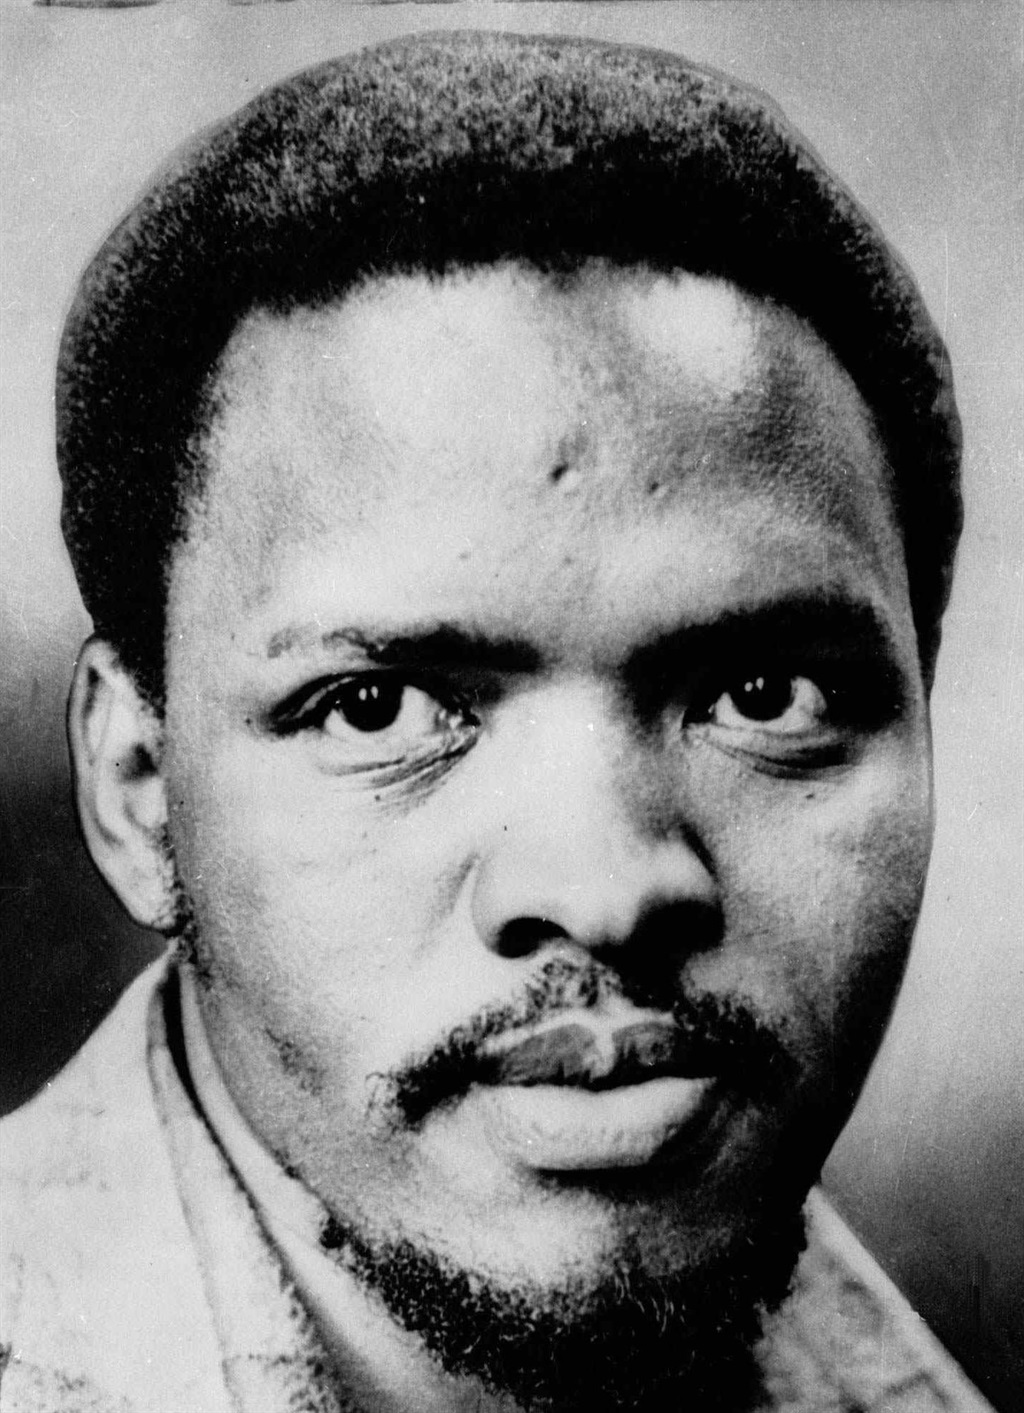 SW20000802INT024:GENERIC:NOCATEGORY:01JAN1980 - AP97091126:INTERNATIONAL:POLITICS:TERRORISM:FUNERALS:POLICE:11SEP97 - Steve Biko, South Africa's Black pride leader who was killed in 1977, is seen in this undated file photo. Police slammed Steve Biko&#x573; head into a wall, chained him crucifixion style to a gate for 24 hours, then covered up the truth about his death, one of the officers admitted Wednesday Sept. 10, 1997. Col. Harold Snyman, squirmed, stammered and looked anywhere but forward as he recounted the 1977 killing of the black pride leader in a bid to win amnesty from South Africa&#x573; Truth and Reconciliation Commission. (AP Photo/FILE ) VERTICALPHOTO: 